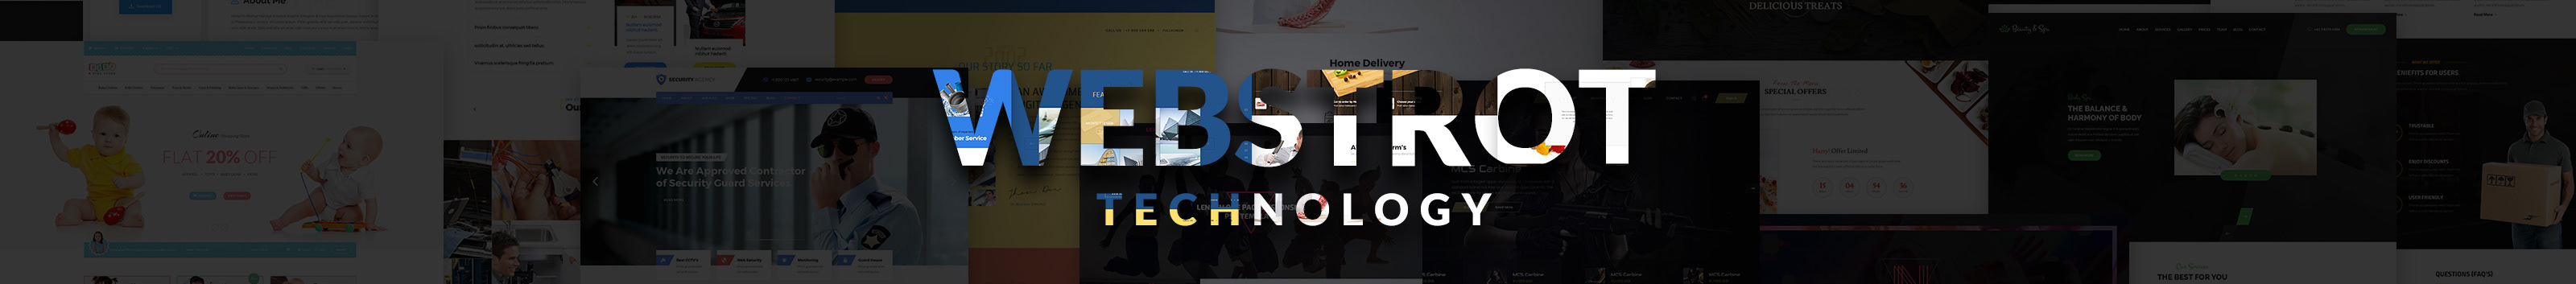 Webstrot Technology's profile banner